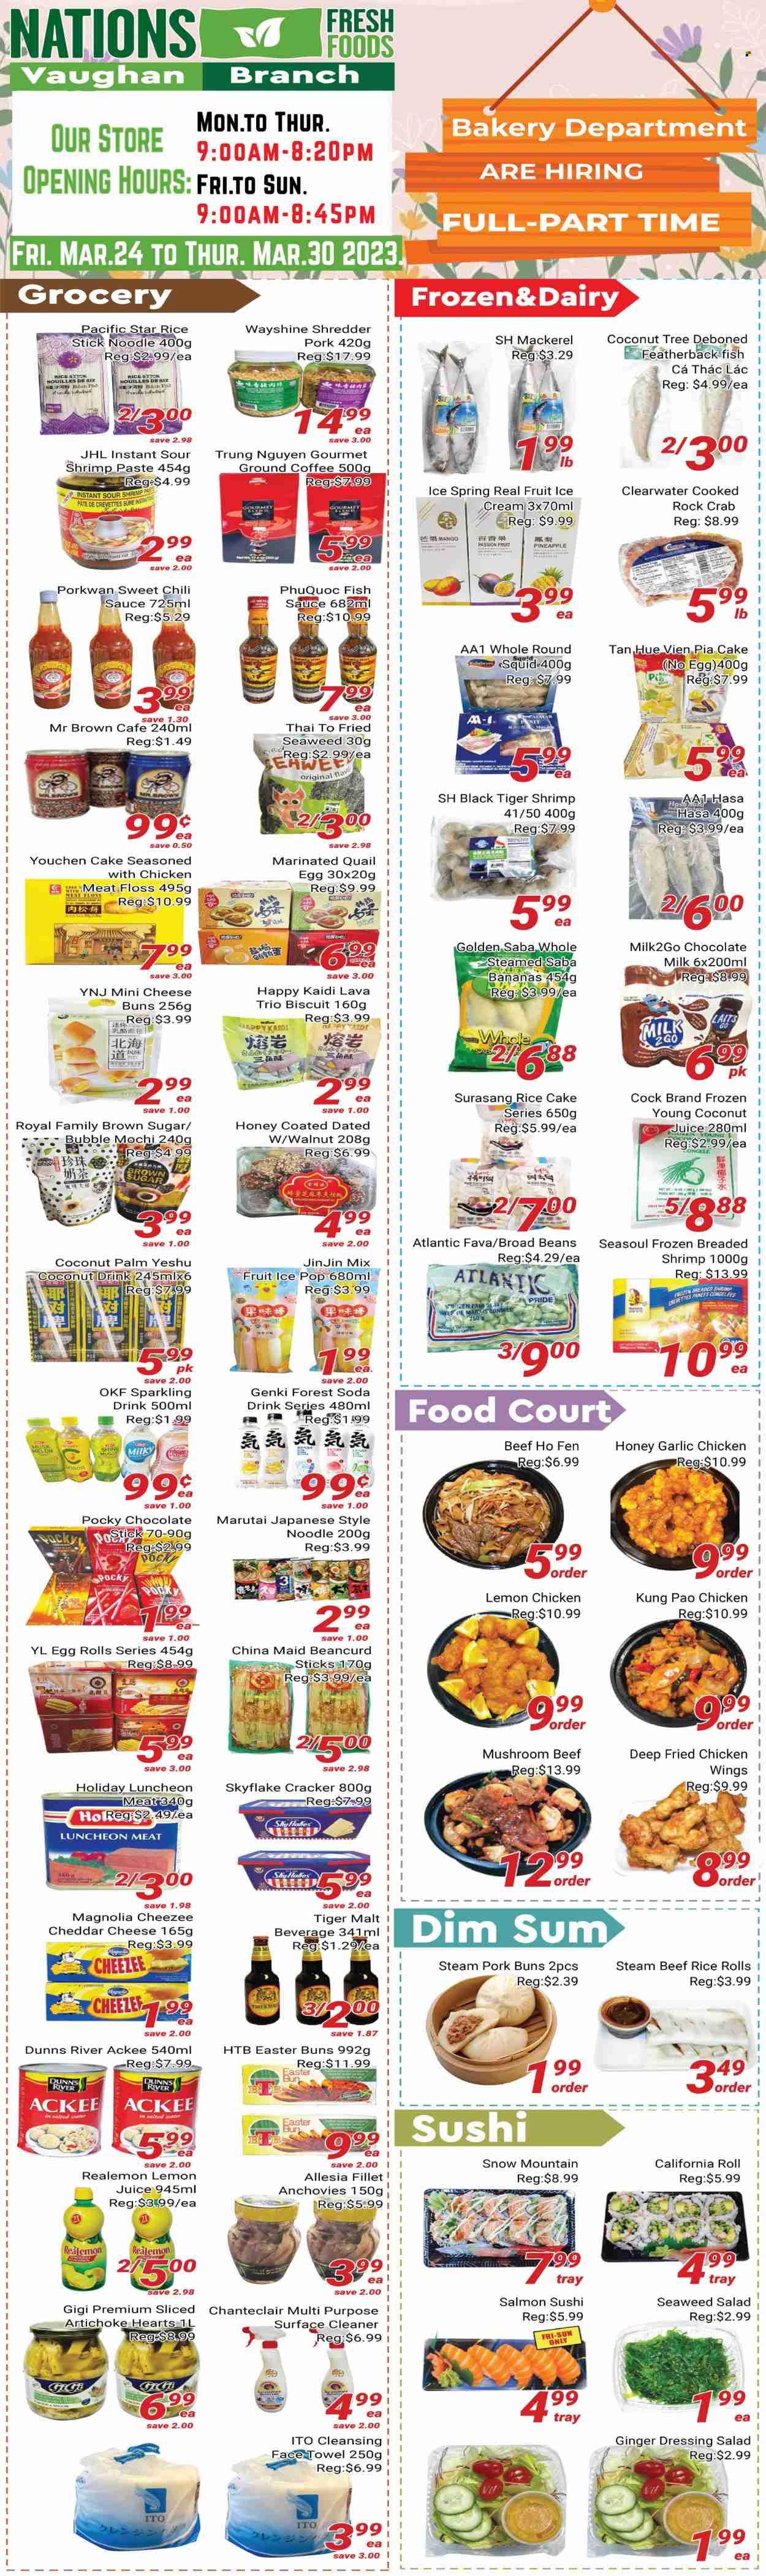 thumbnail - Nations Fresh Foods Flyer - March 24, 2023 - March 30, 2023 - Sales products - mushrooms, buns, artichoke, fava beans, garlic, ginger, salad, pineapple, melons, mackerel, squid, crab, fish, sauce, egg rolls, fried chicken, noodles, lunch meat, cheddar, milk, ice cream, milk chocolate, crackers, biscuit, cane sugar, anchovies, fish sauce, chilli sauce, dressing, shrimp paste, honey, Coca-Cola, Coke, soda, lemon juice, coffee, ground coffee, quail, surface cleaner, cleaner. Page 1.